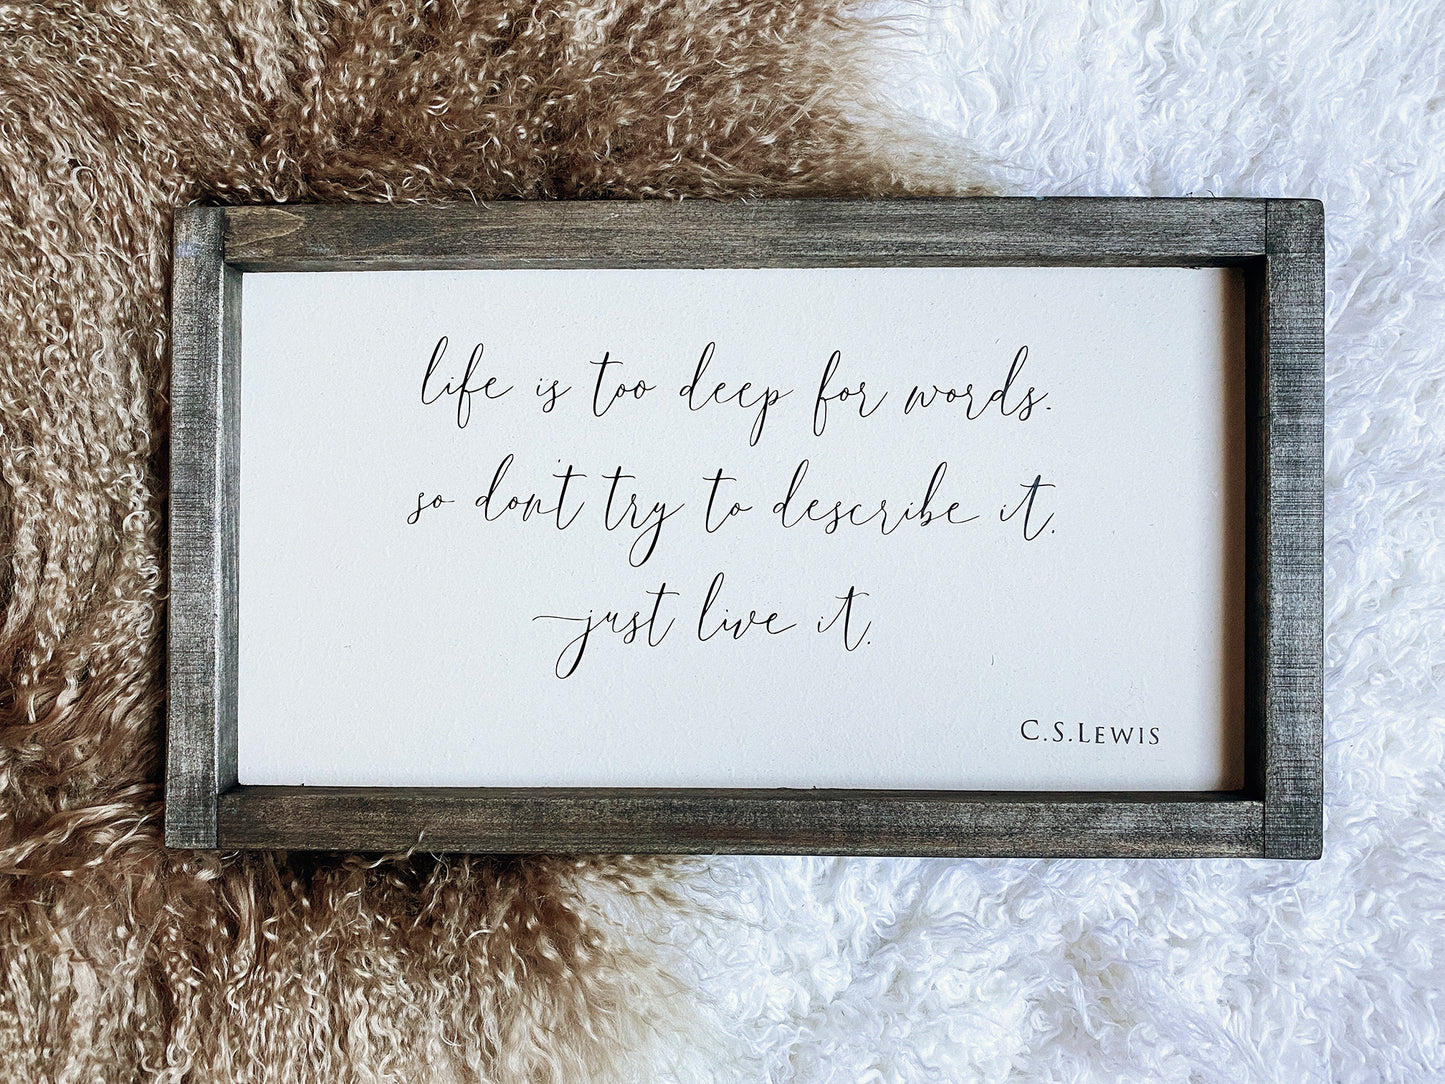 C.S. Lewis Quote Wooden Framed Sign